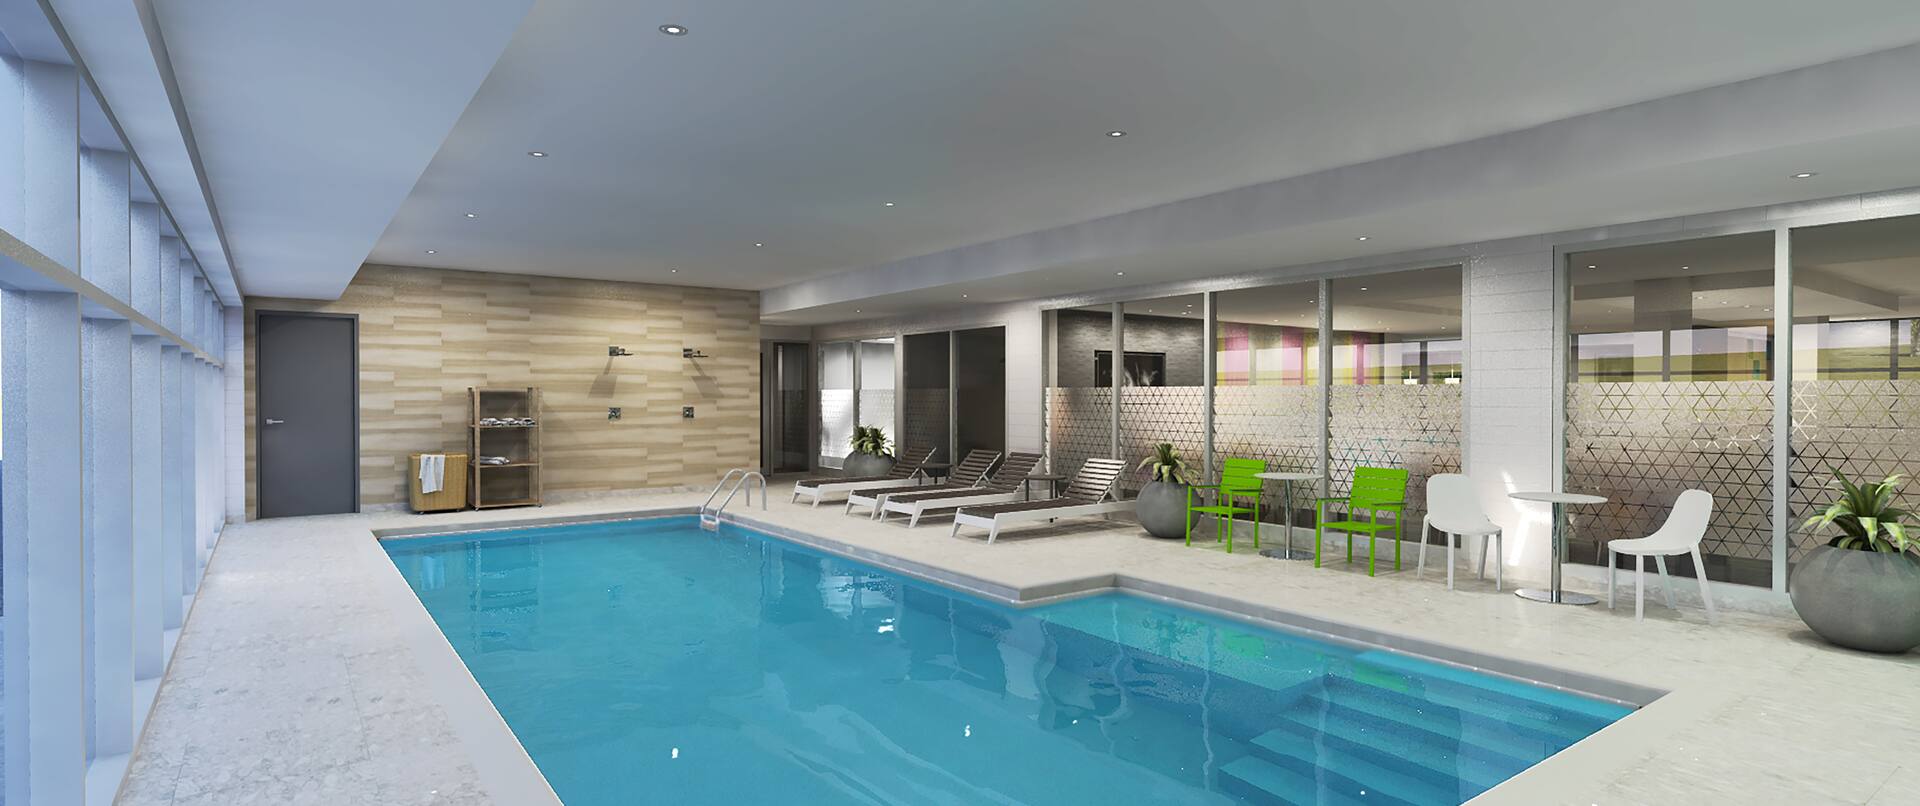 Indoor pool area with seating